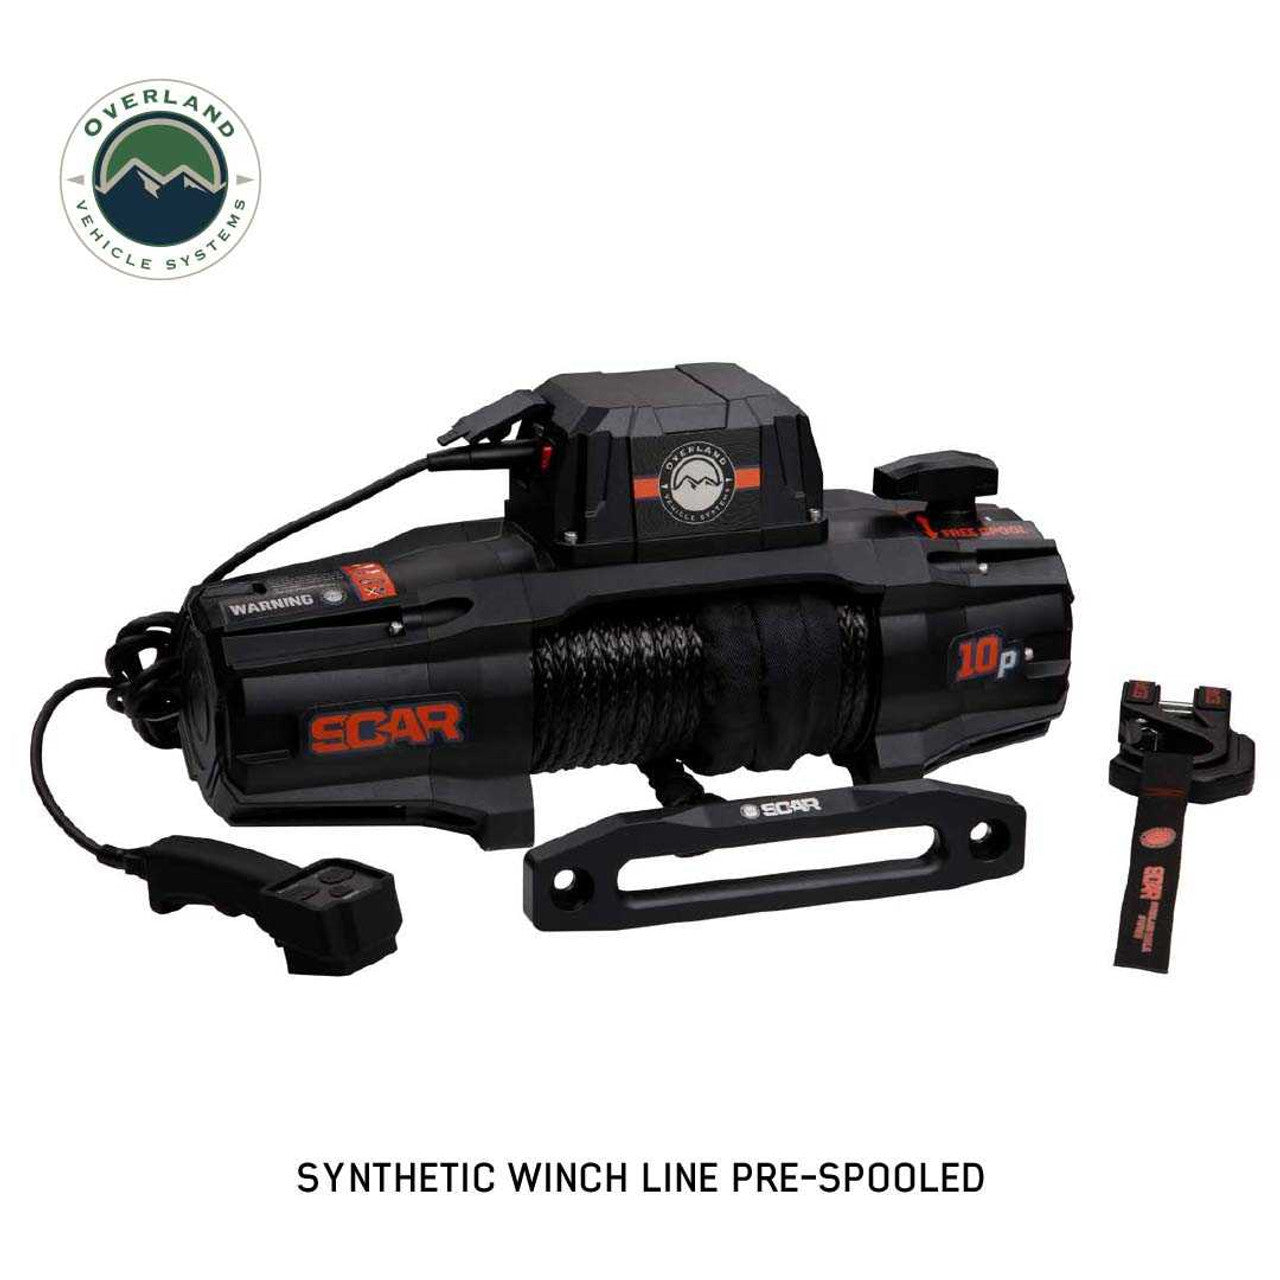 SCAR 10S - 10,000 Lbs. Rated Synthetic Rope Winch 19099901